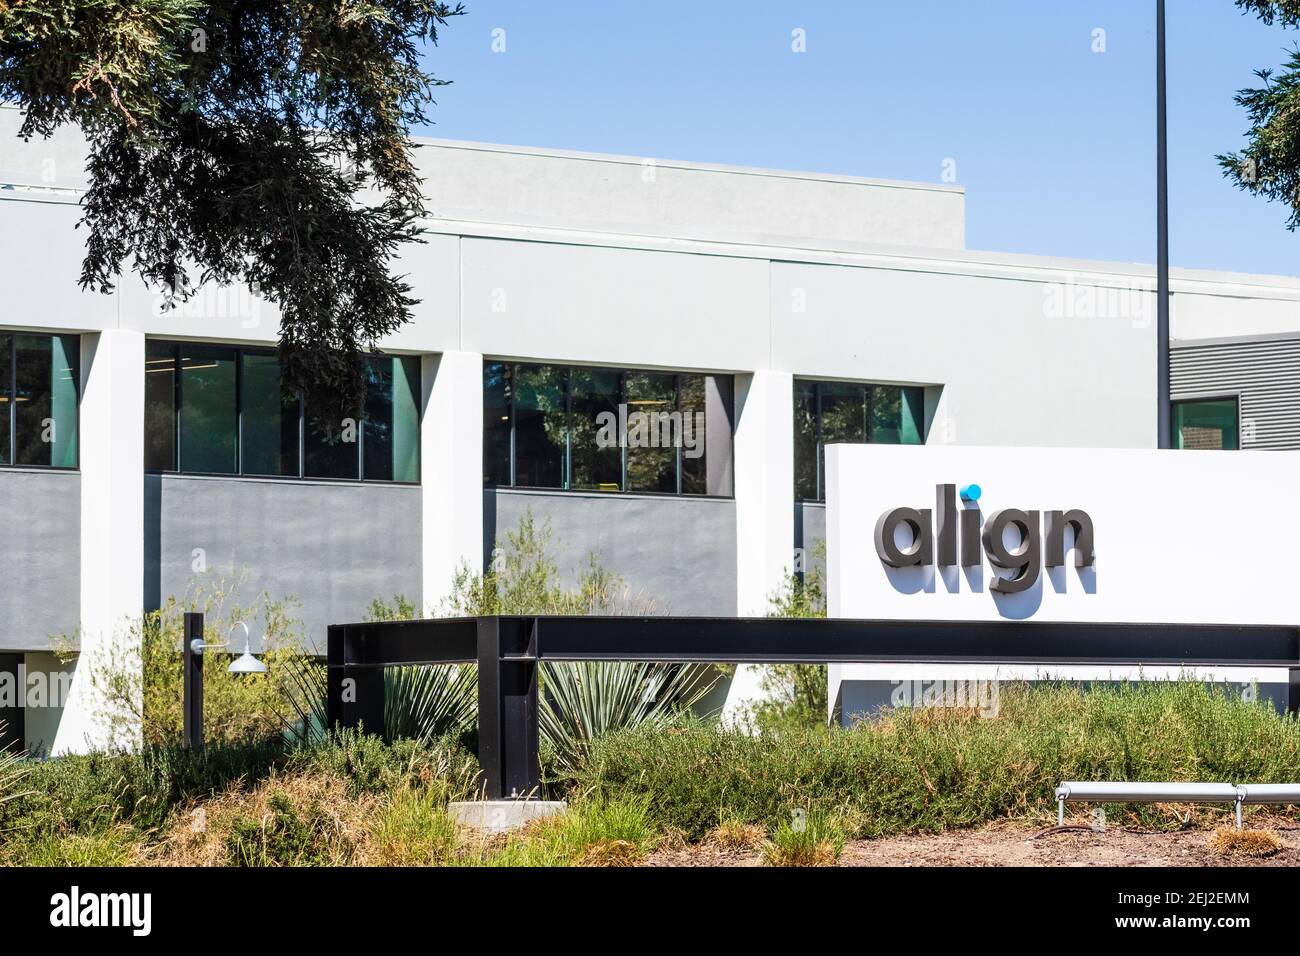 https://c8.alamy.com/comp/2EJ2EMM/sep-18-2020-san-jose-ca-usa-align-headquarters-in-silicon-valley-align-technology-is-a-manufacturer-of-3d-digital-scanners-and-the-invisalign-2EJ2EMM.jpg